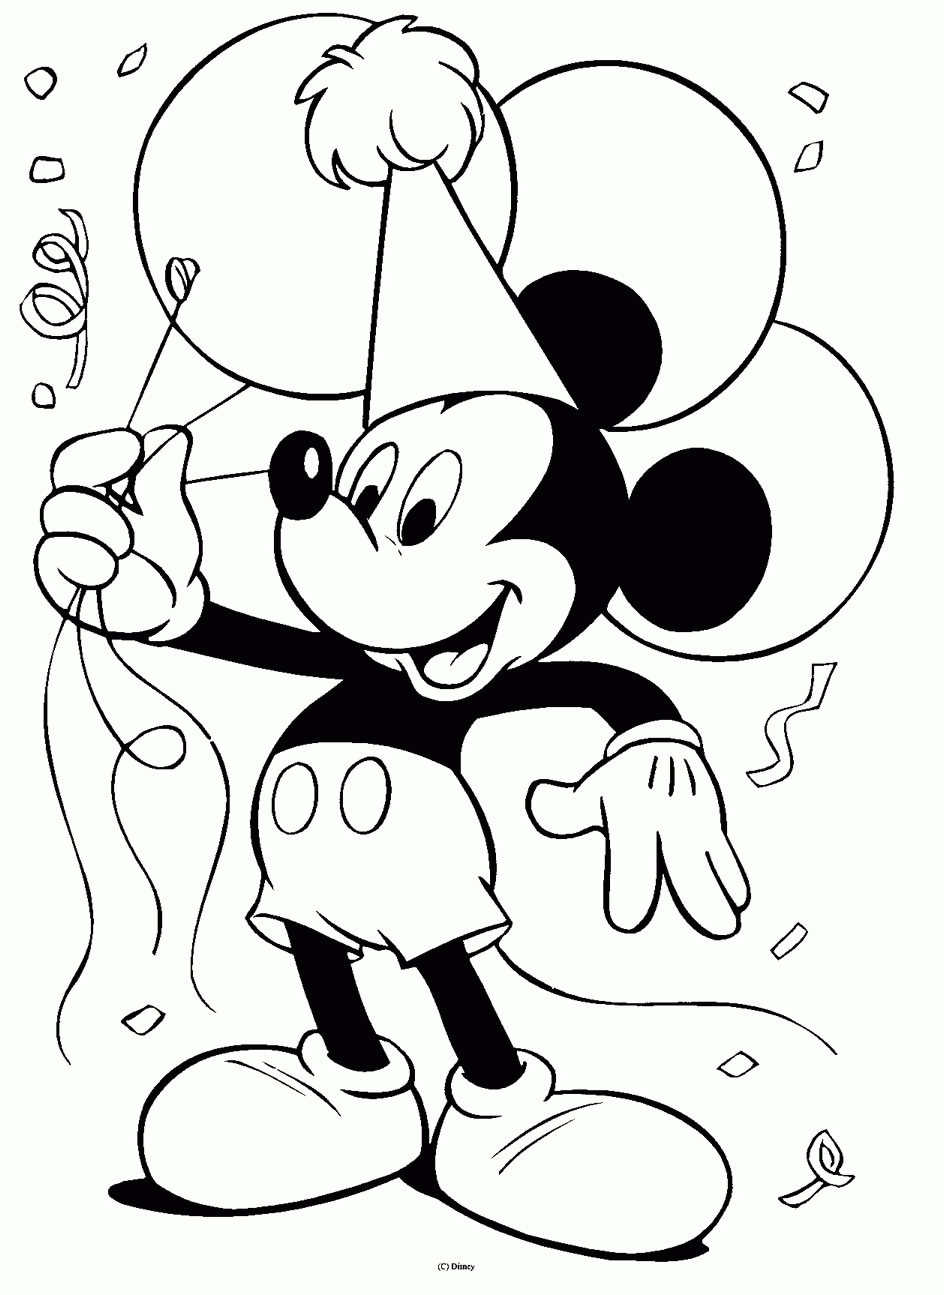 free disney coloring pages disney coloring pages to download and print for free disney pages coloring free 